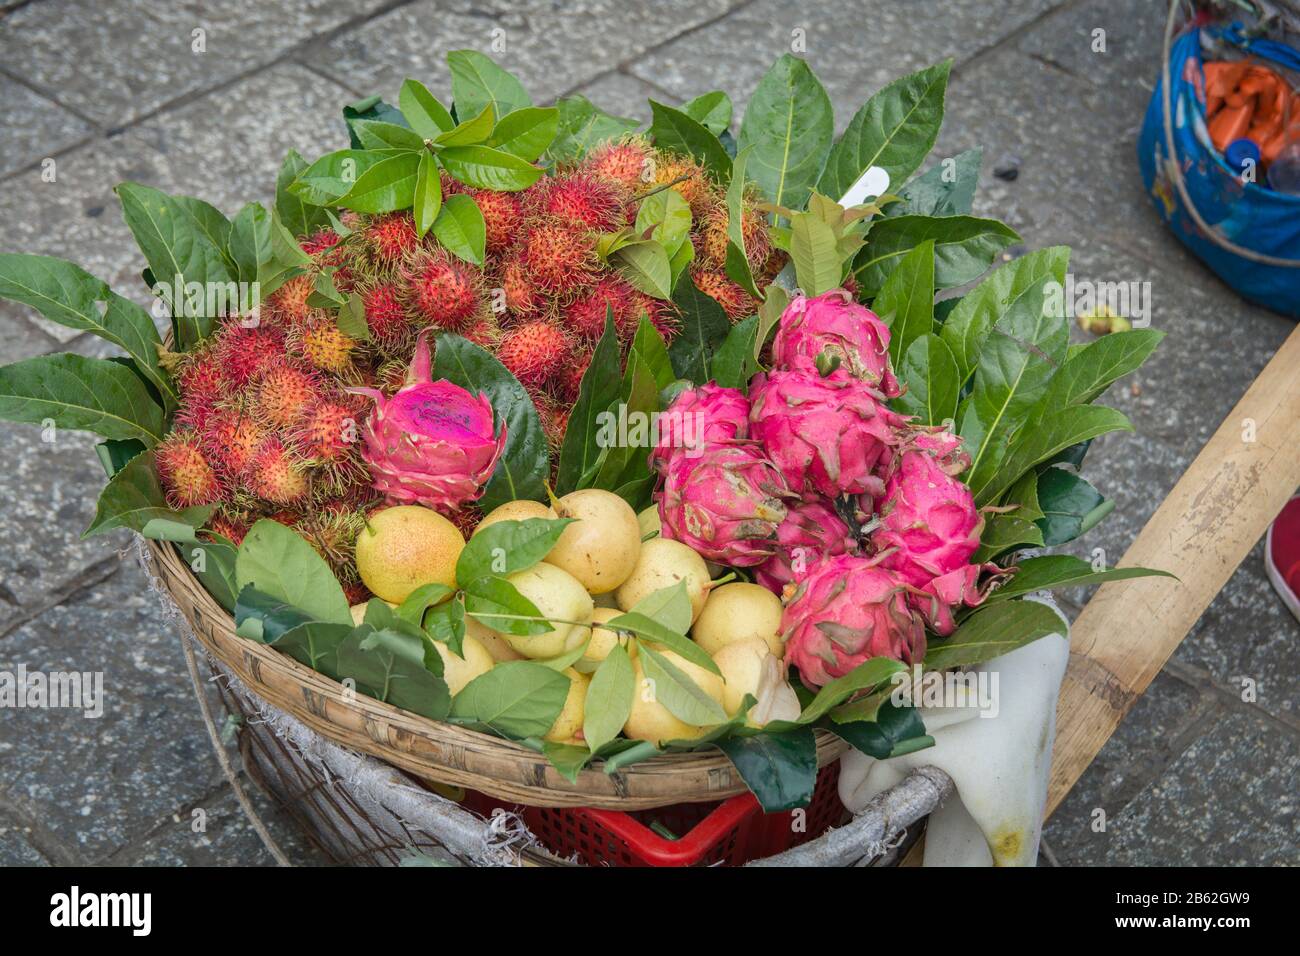 Colorful exotic fruits basket, containing Dragon fruits, Rambutan and pears, being sold in the market of Dali, Yunnan, China Stock Photo